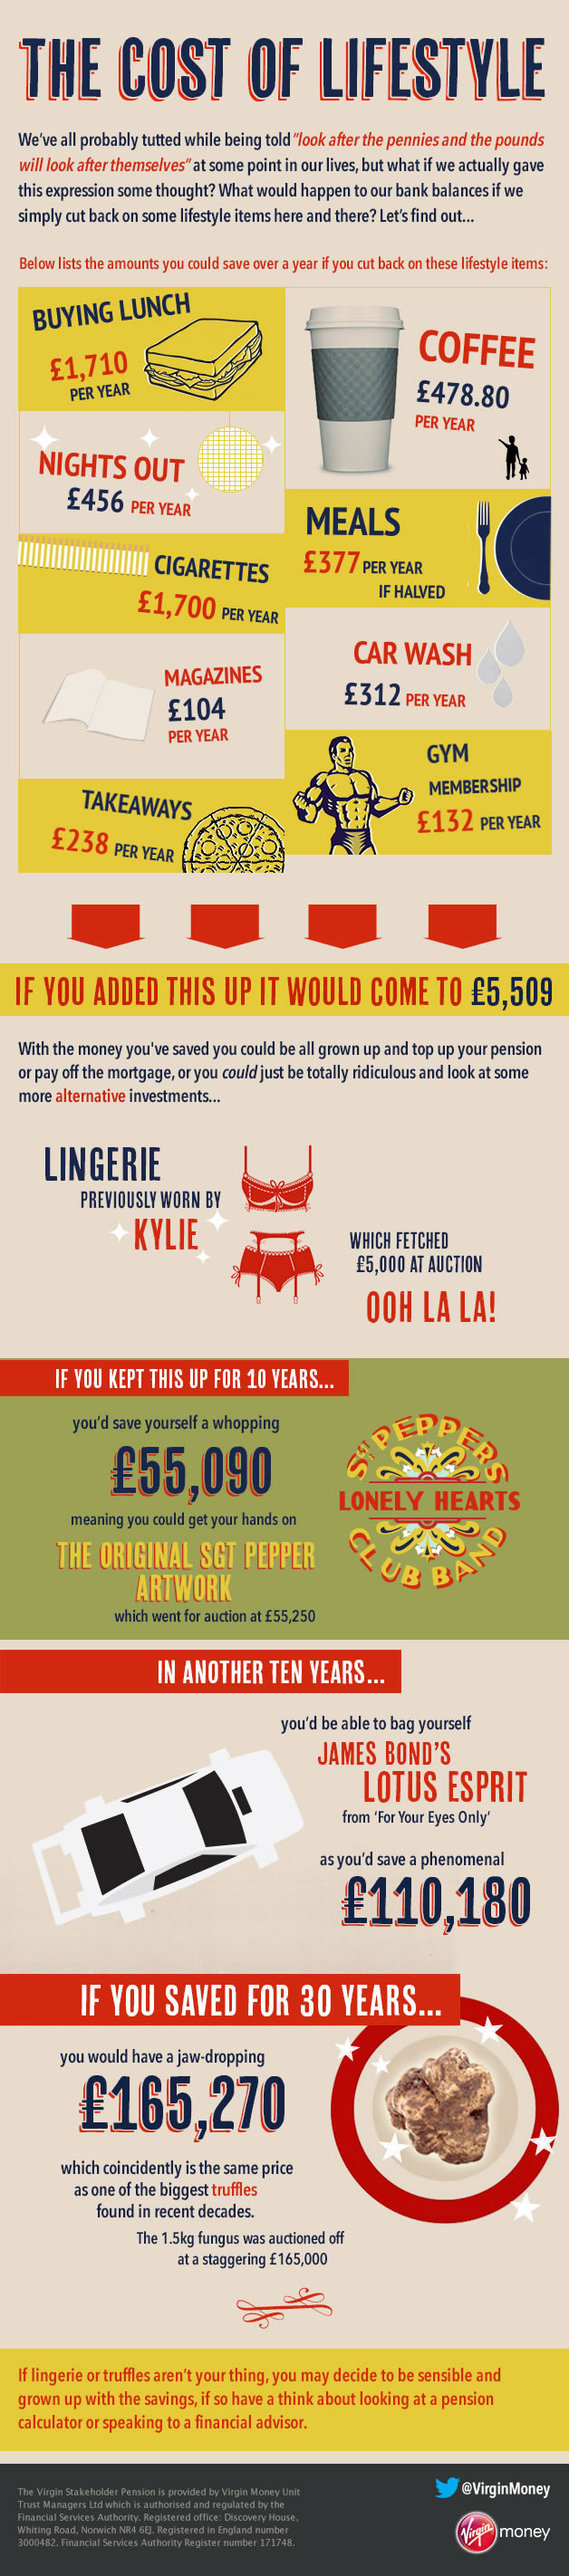 The Cost of Lifestyle - infographic